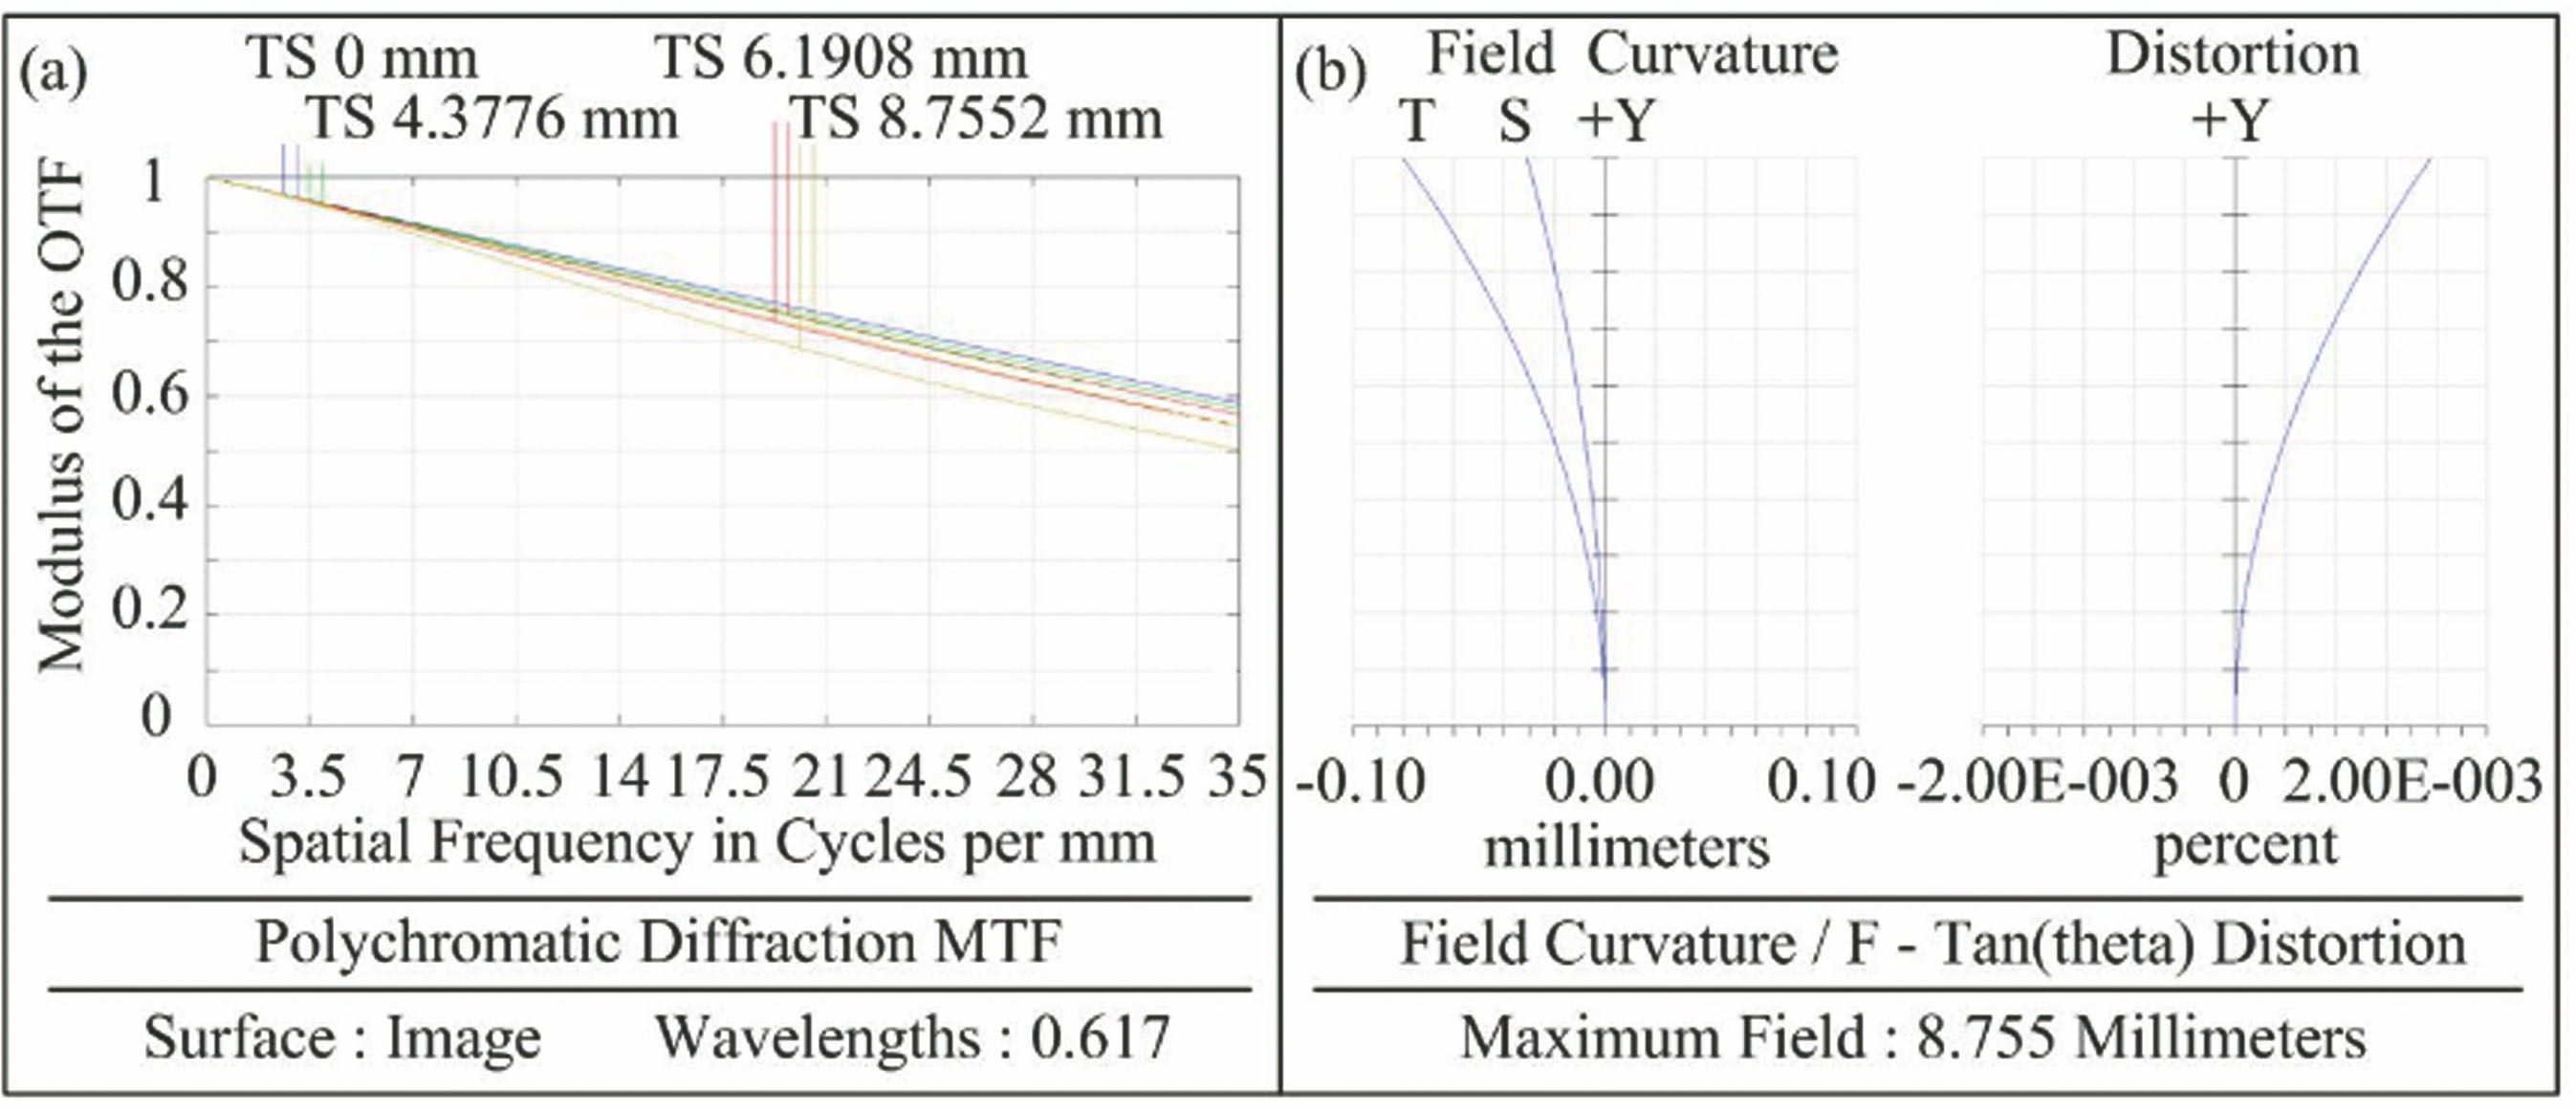 Imaging performance of experimental system. (a) MTF curve; (b) field curvature and distortion